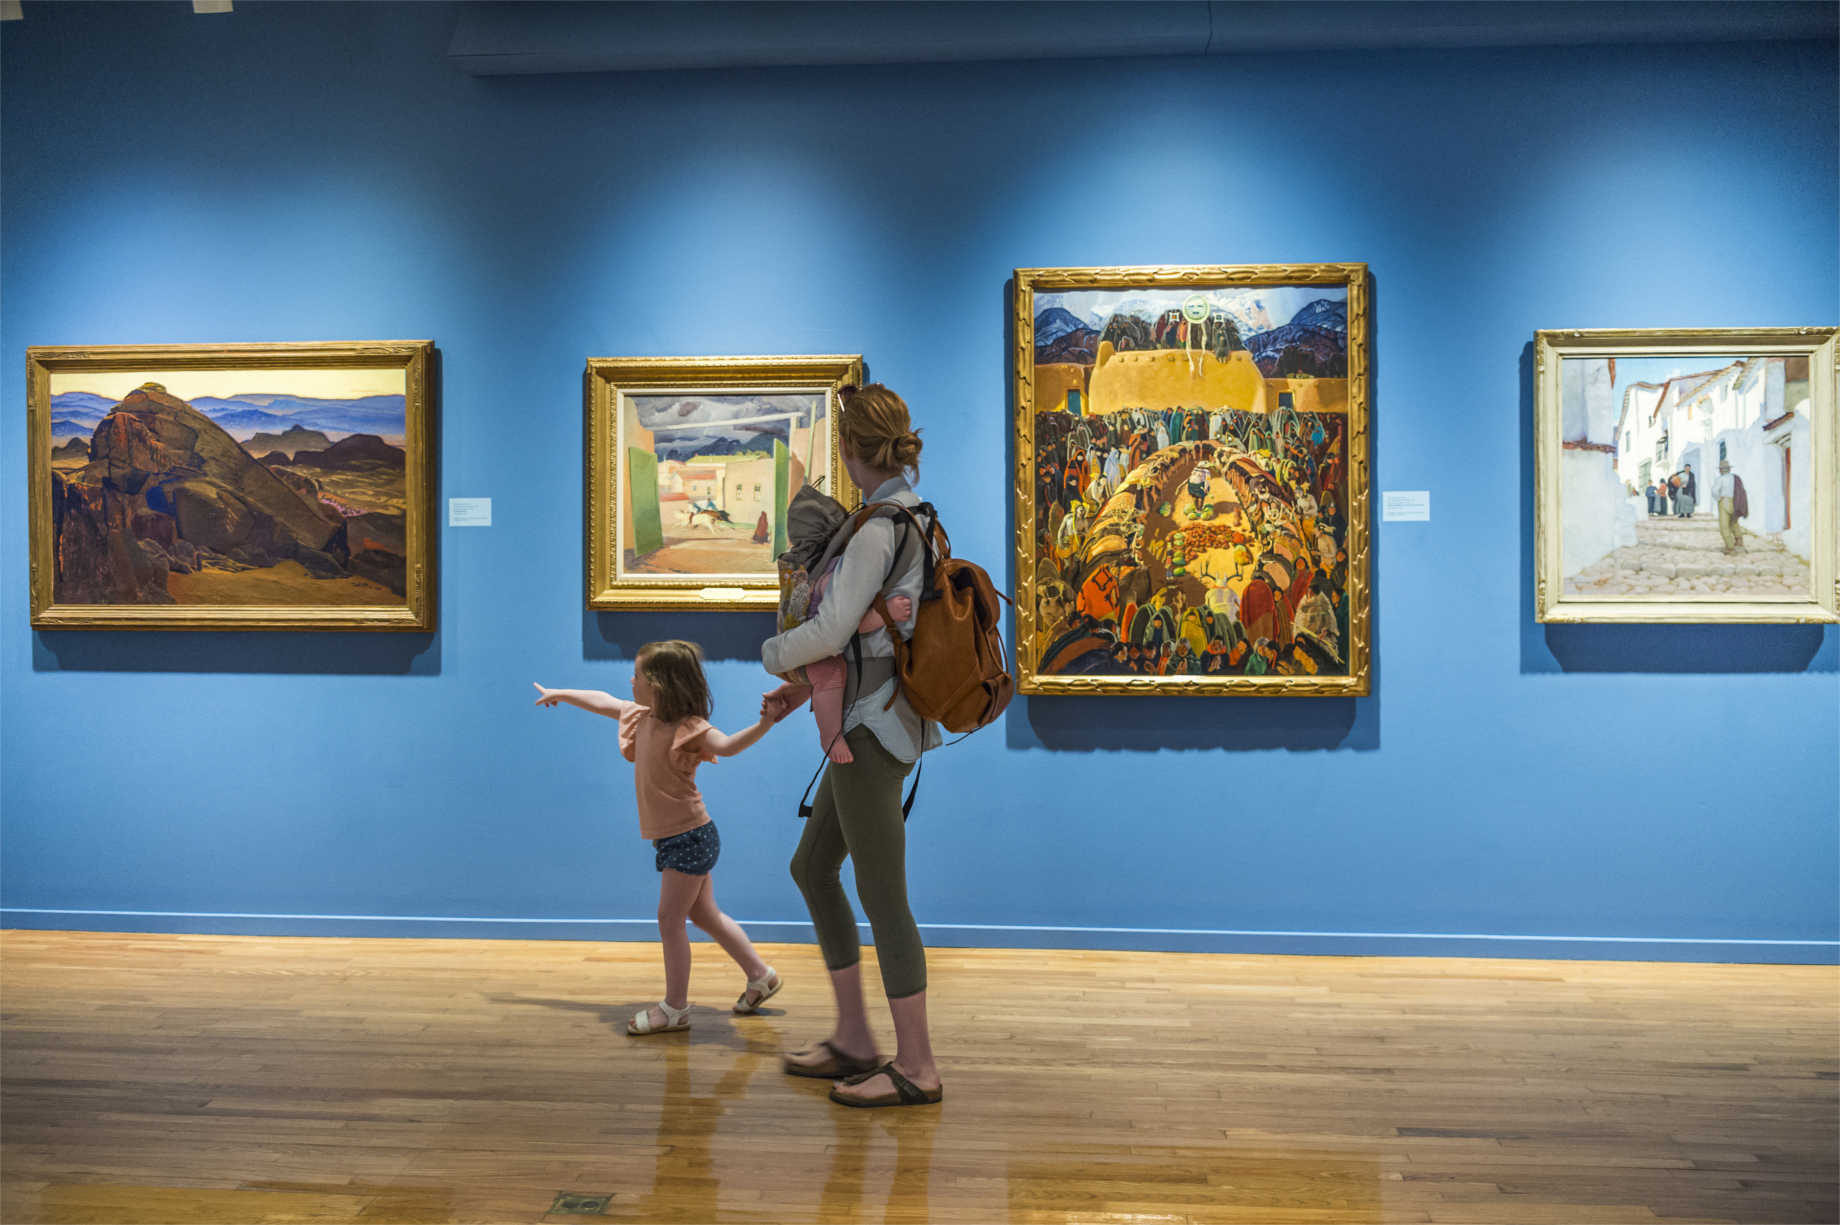 The Gilcrease possesses a rich collection of American artworks. Image courtesy of the Gilcrease Museum.